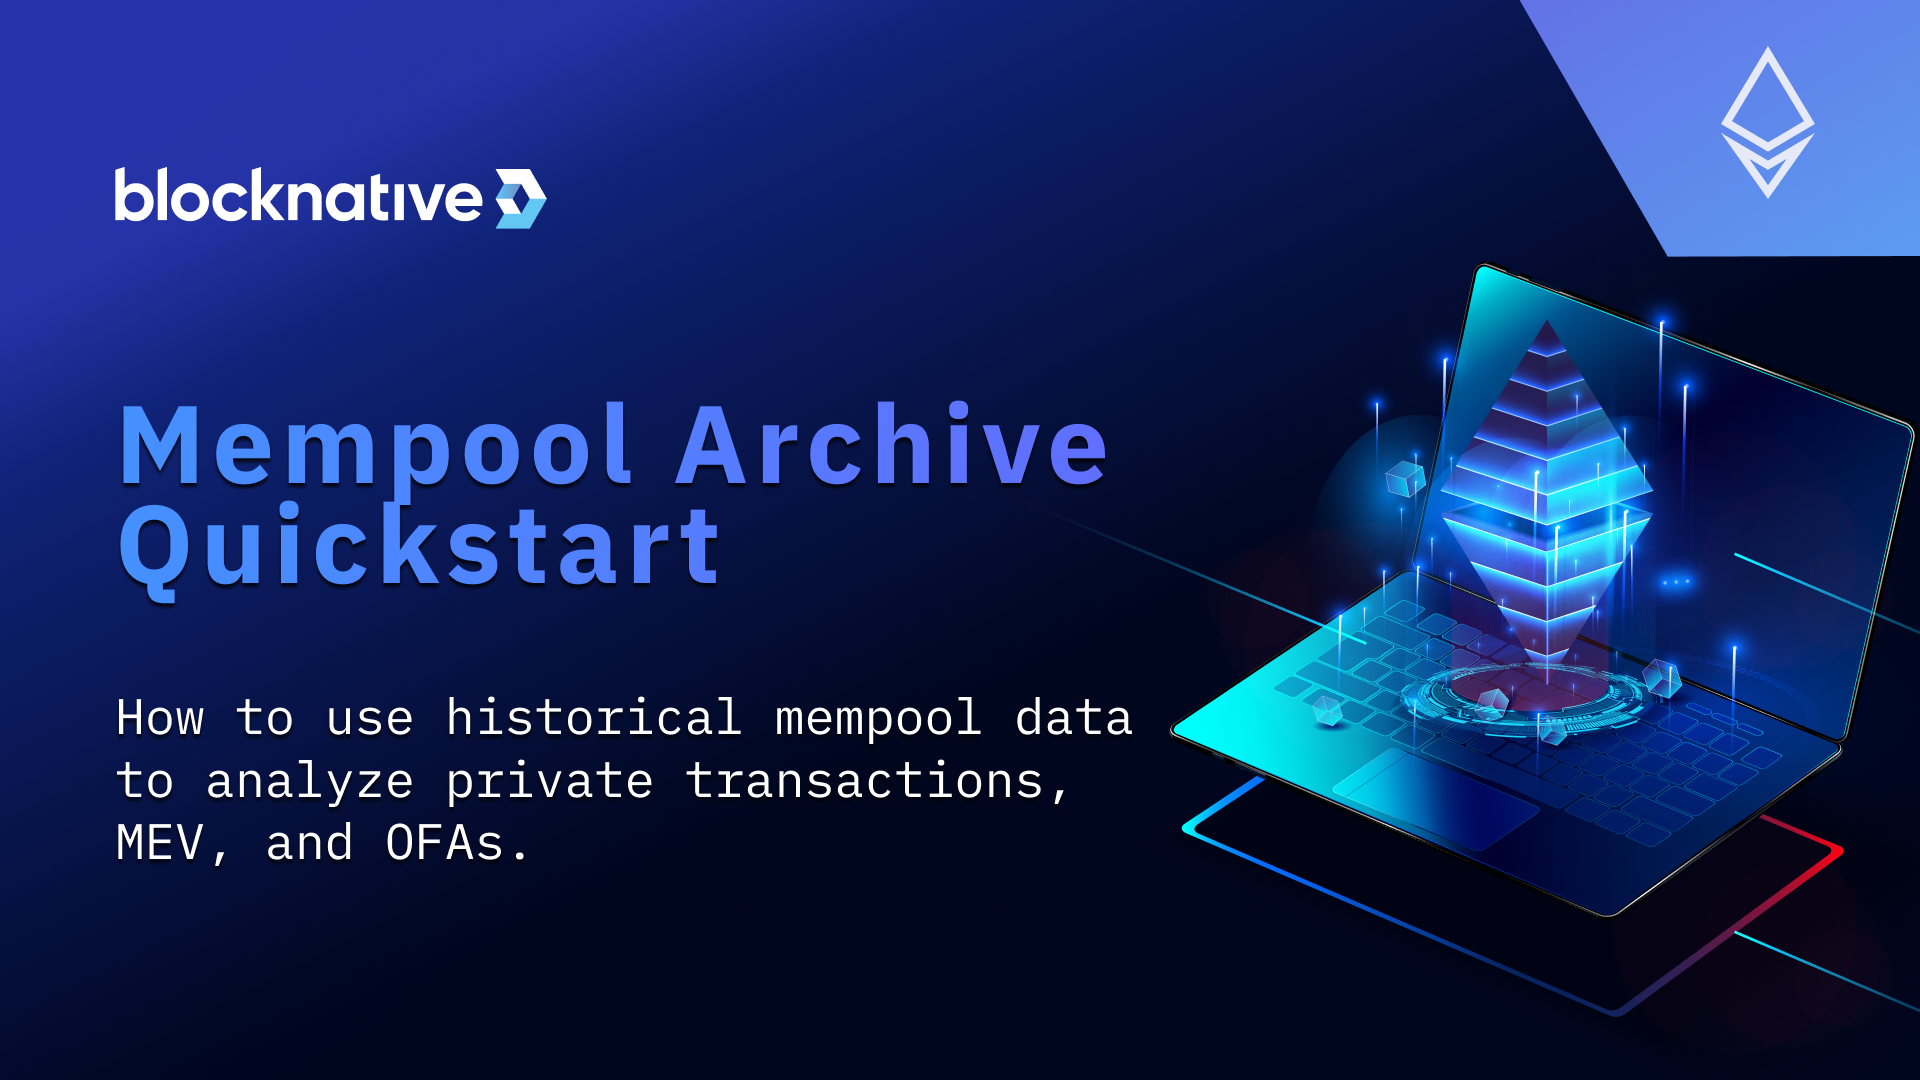 mempool-archive-quickstart:-how-to-use-blocknative's-historical-ethereum-mempool-data-to-analyze-private-transactions,-mev,-and-ofas